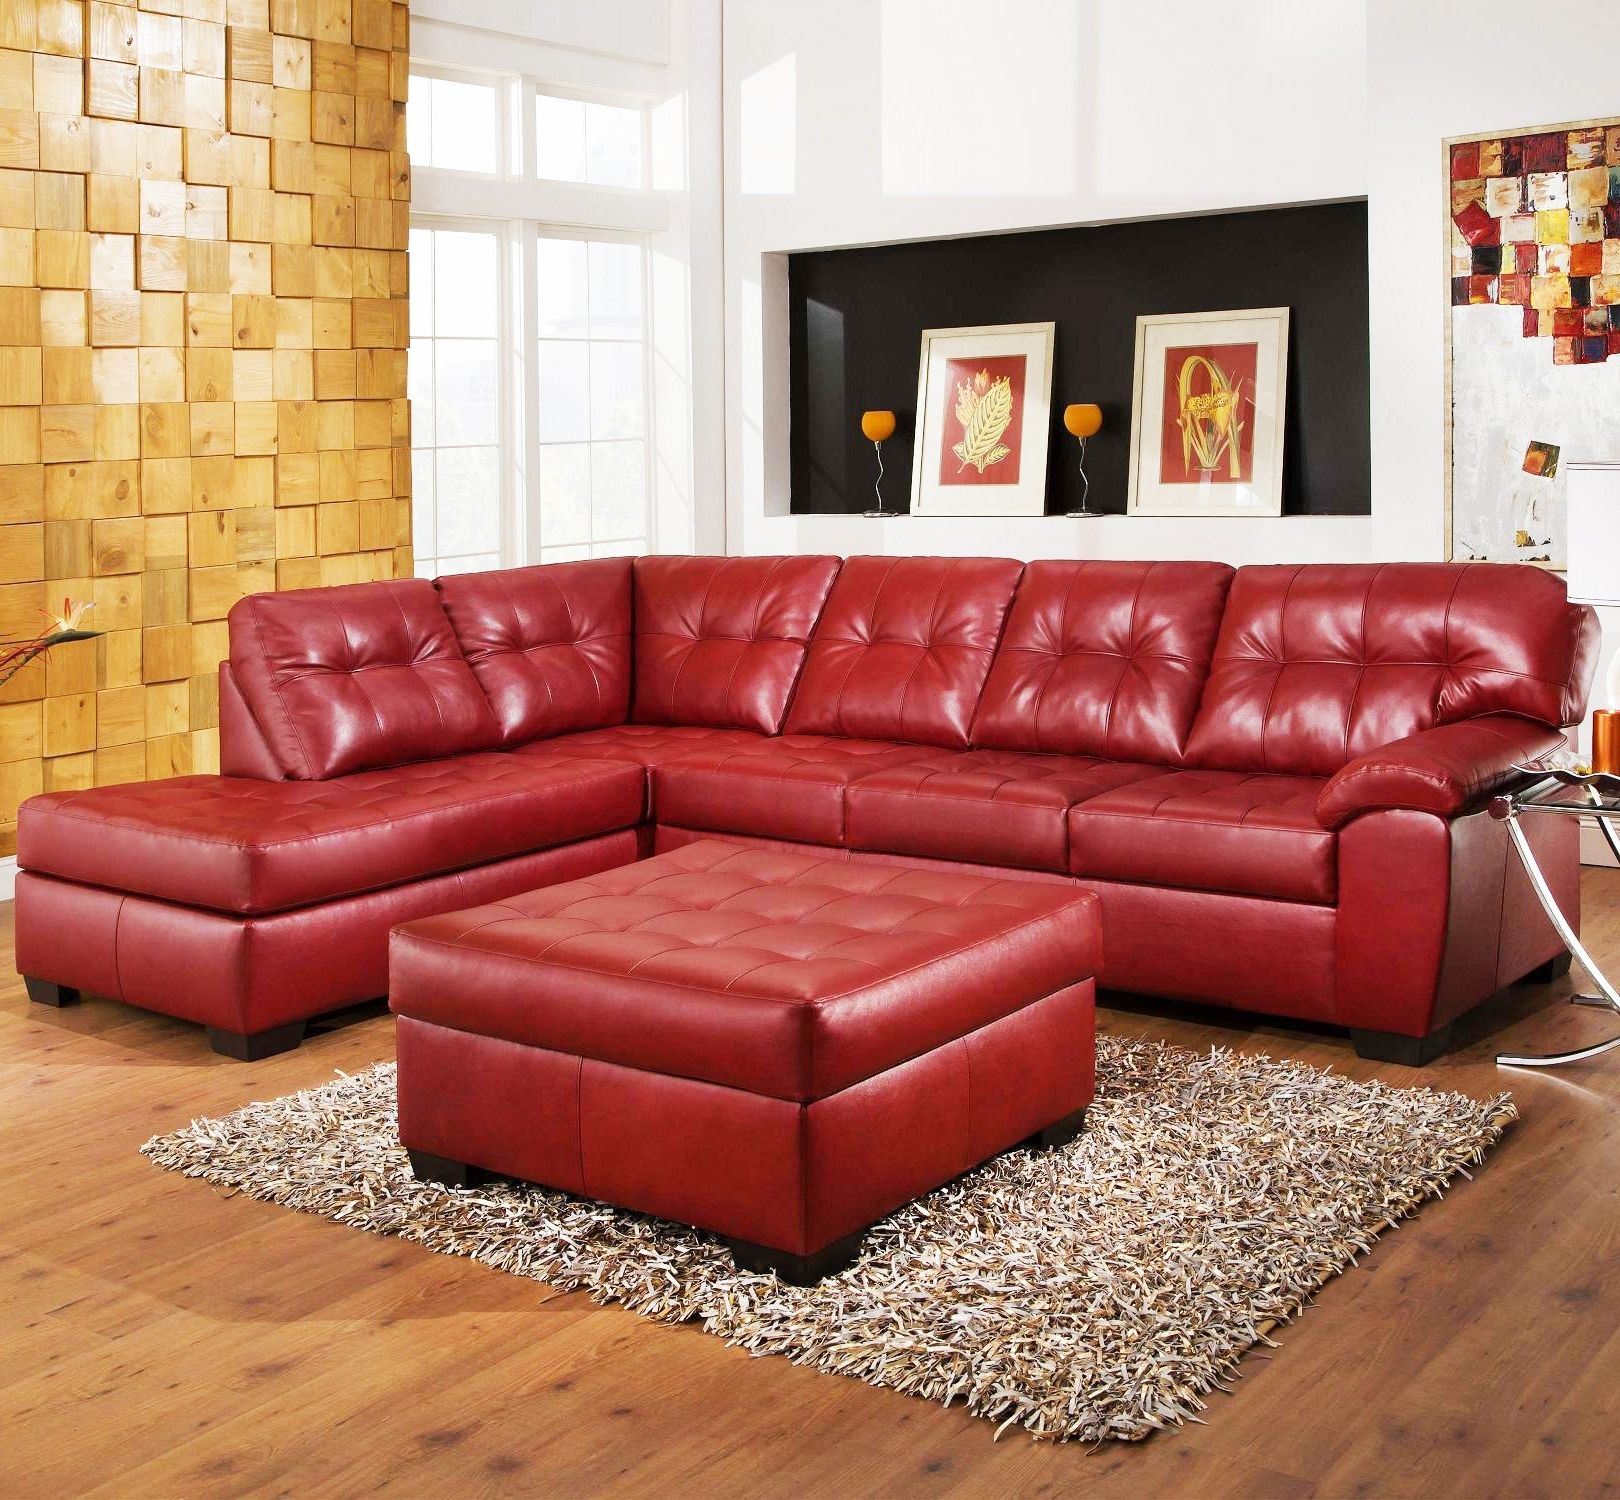 Red Leather Sectionals With Ottoman For Well Liked Living Room: Astonishing Rooms To Go Sectional Leather Havertys (View 1 of 20)